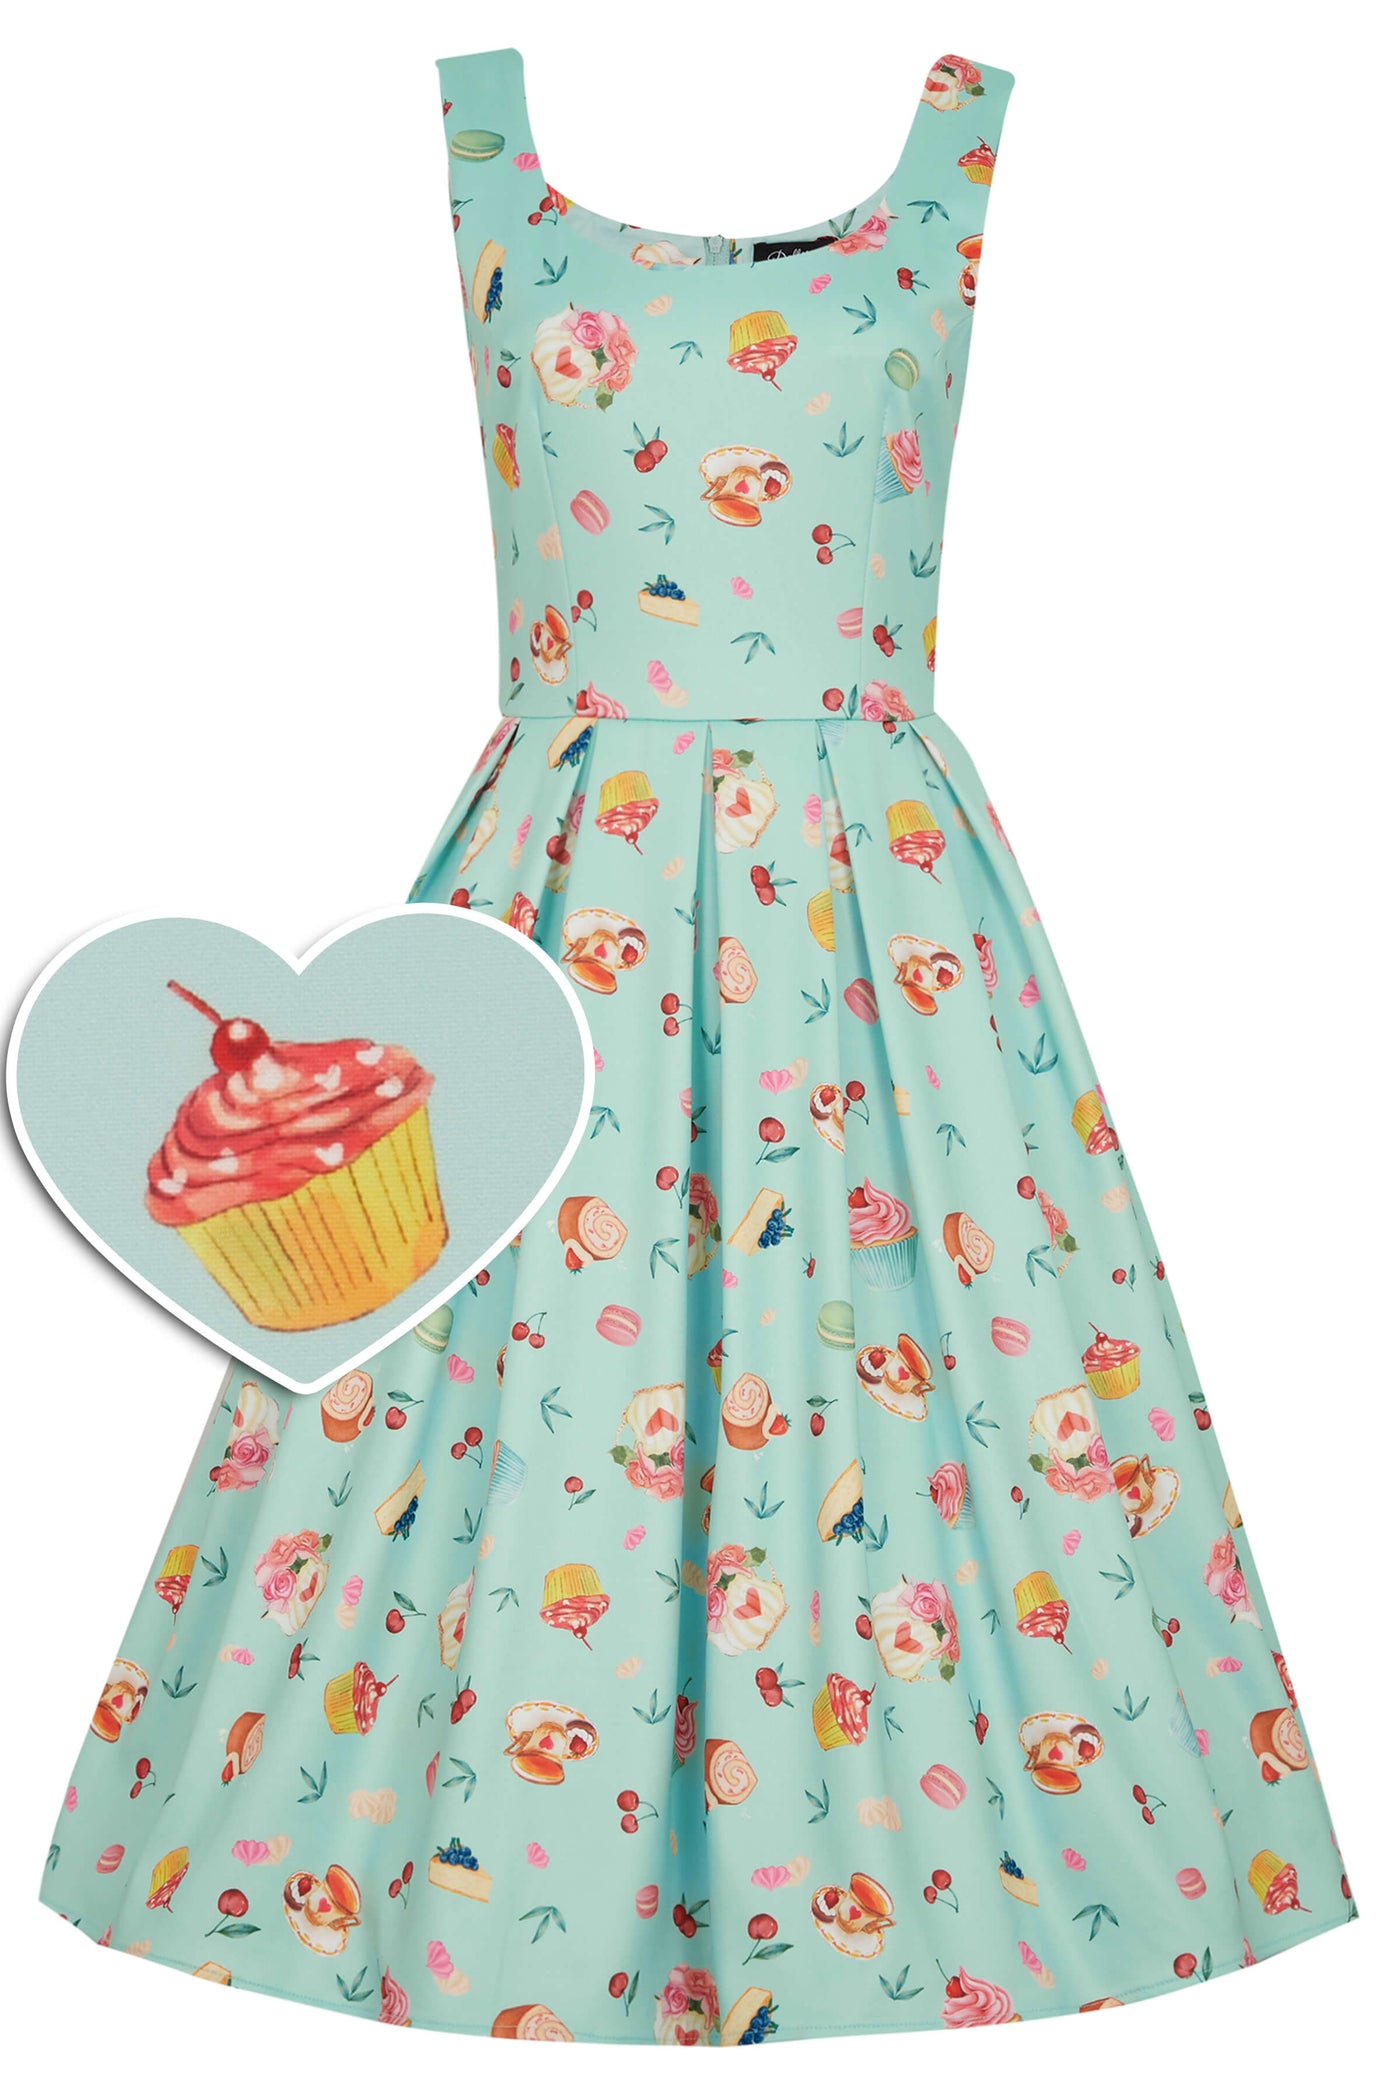 1950's Tea Dress In Blue Cakes Print Front